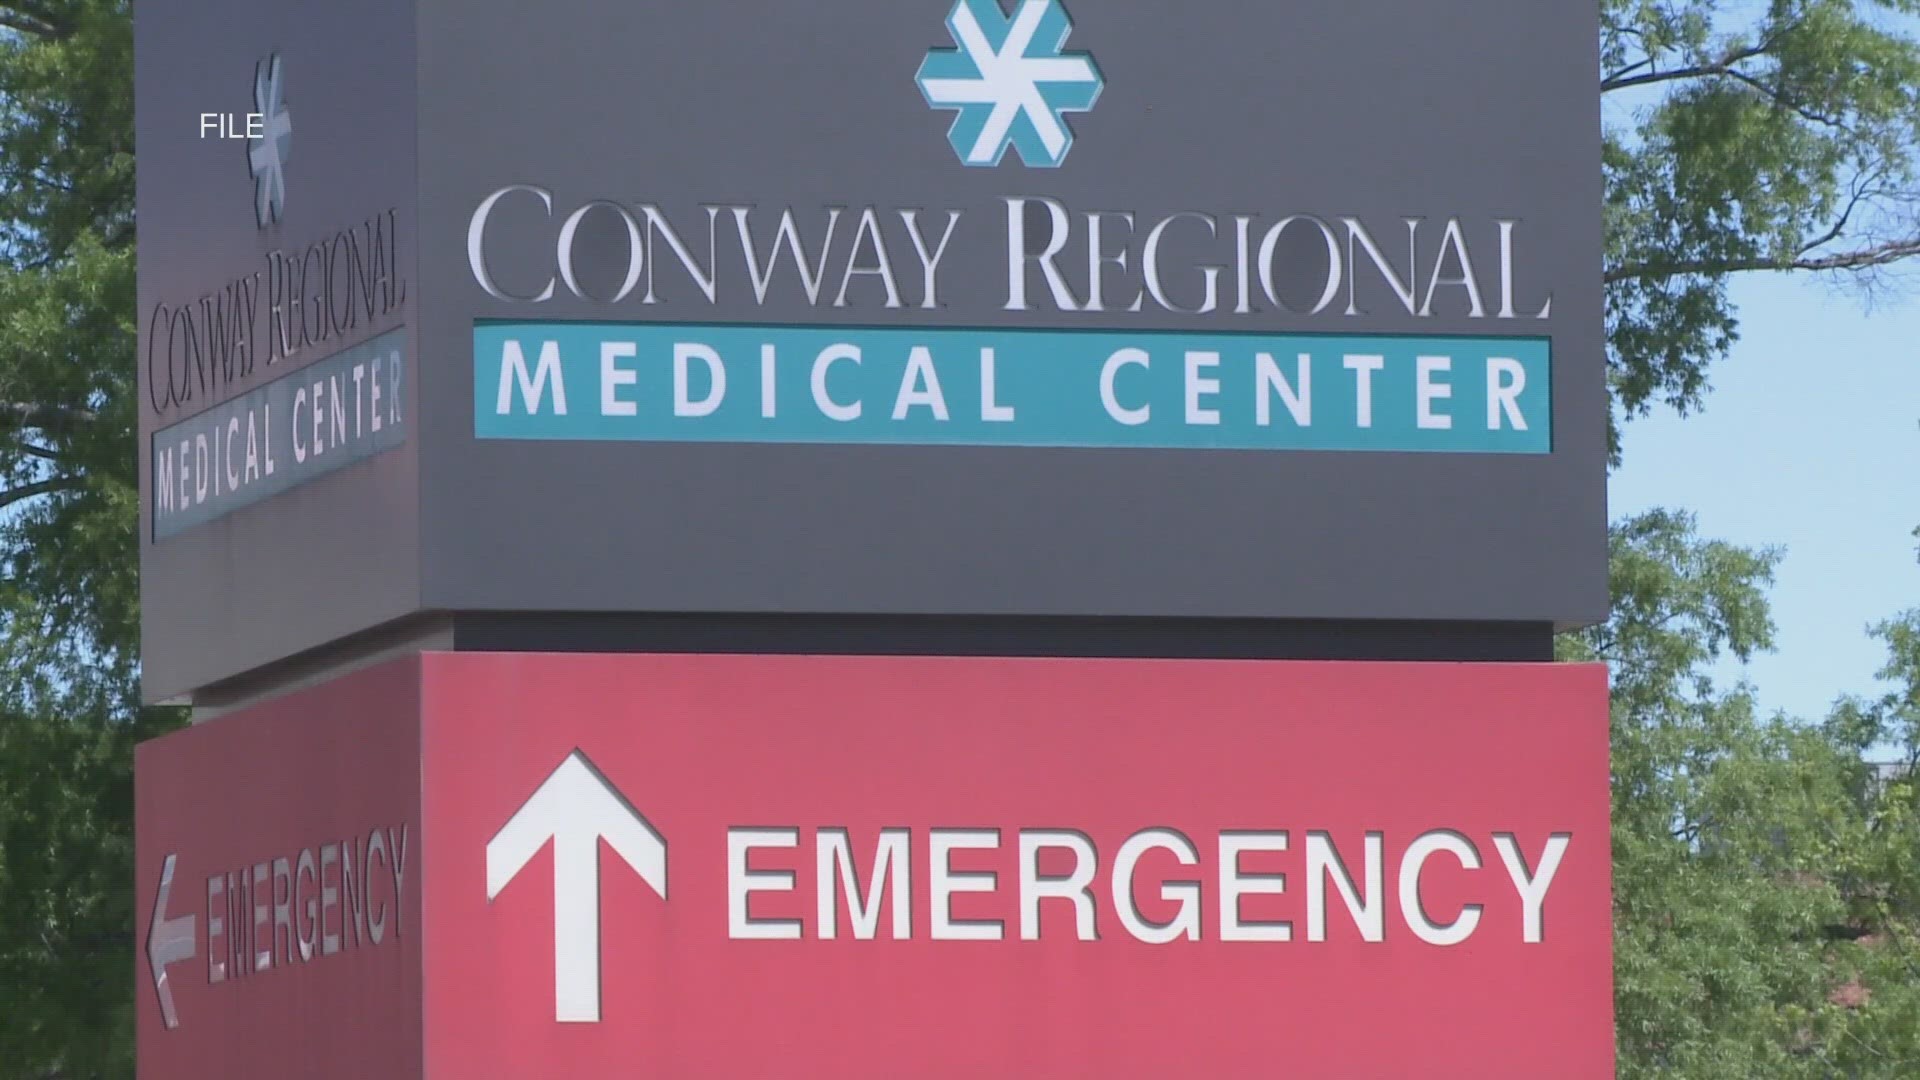 Hundreds of patients will be back in network after successful contract negotiations.